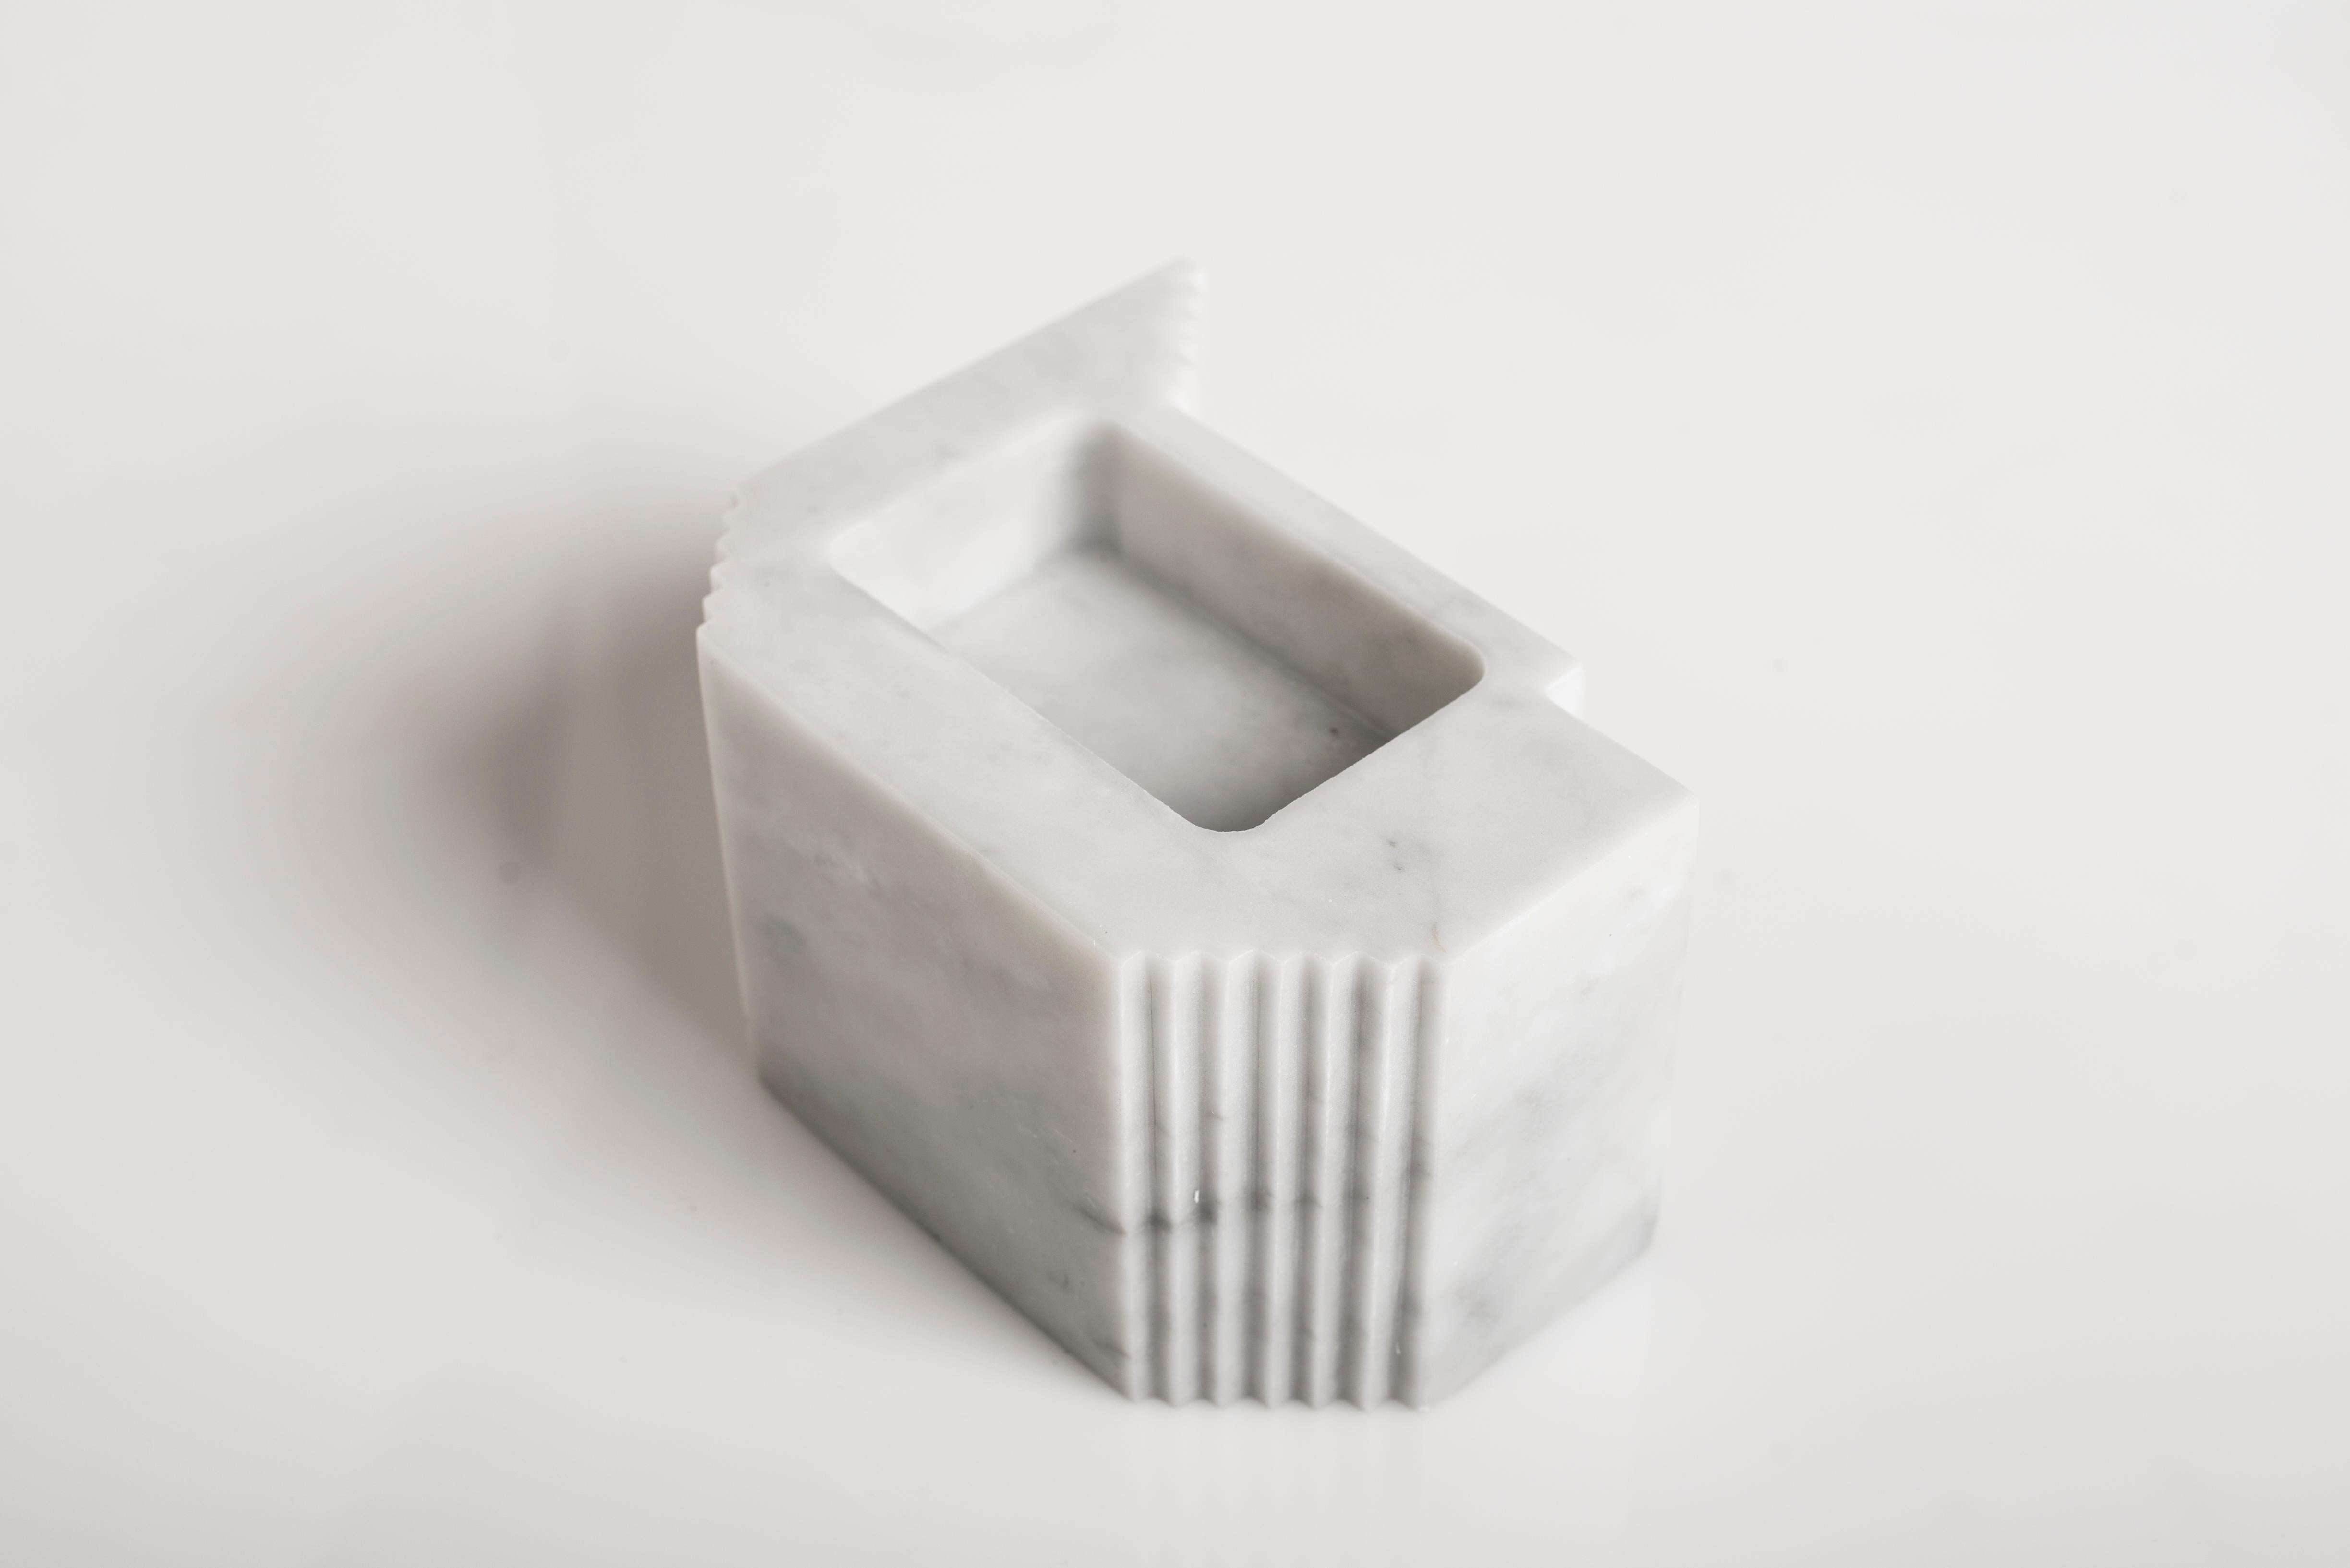 Treviso Sculpture by Carlo Massoud
Handmade 
Dimensions: D 12 x W 15 x H 9 cm 
Materials: Carrara Marble

Carlo Massoud’s work stems from his relentless questioning of social, political, cultural, and environmental norms. He often pushes his viewers